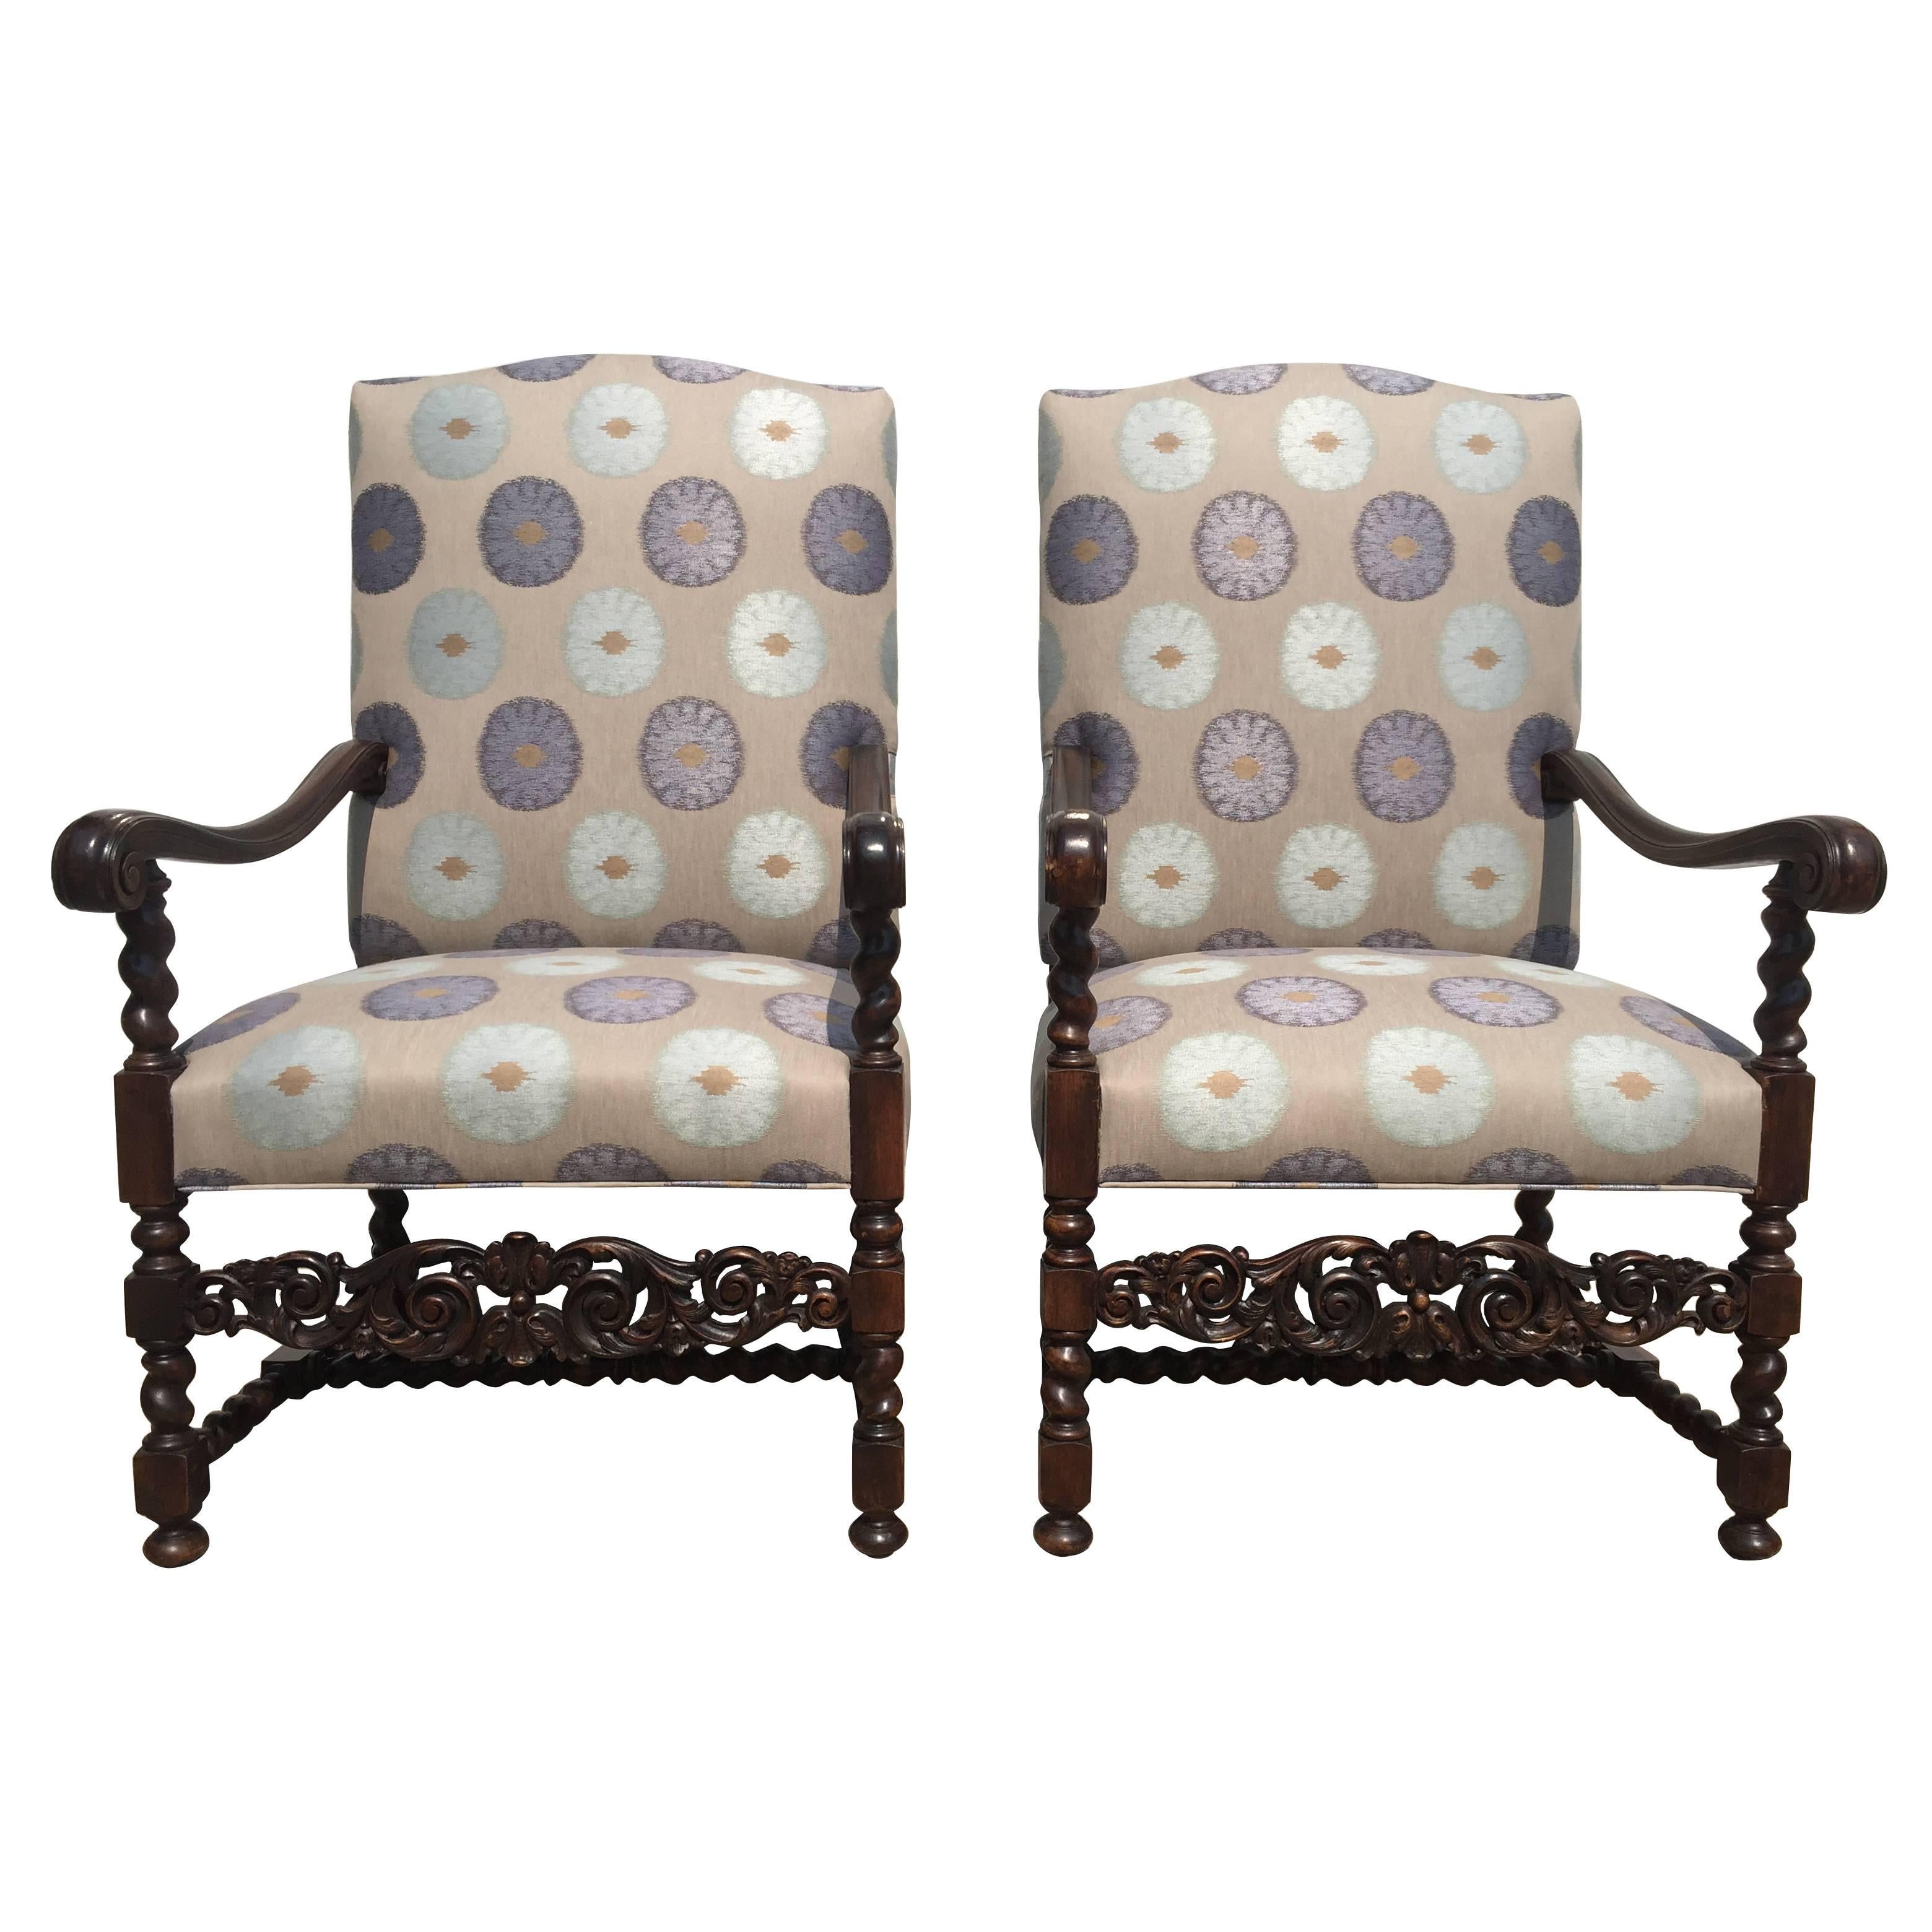 Chateau Chairs, French, 1880s Carved Walnut Frame with Mokum Fabric Restored For Sale